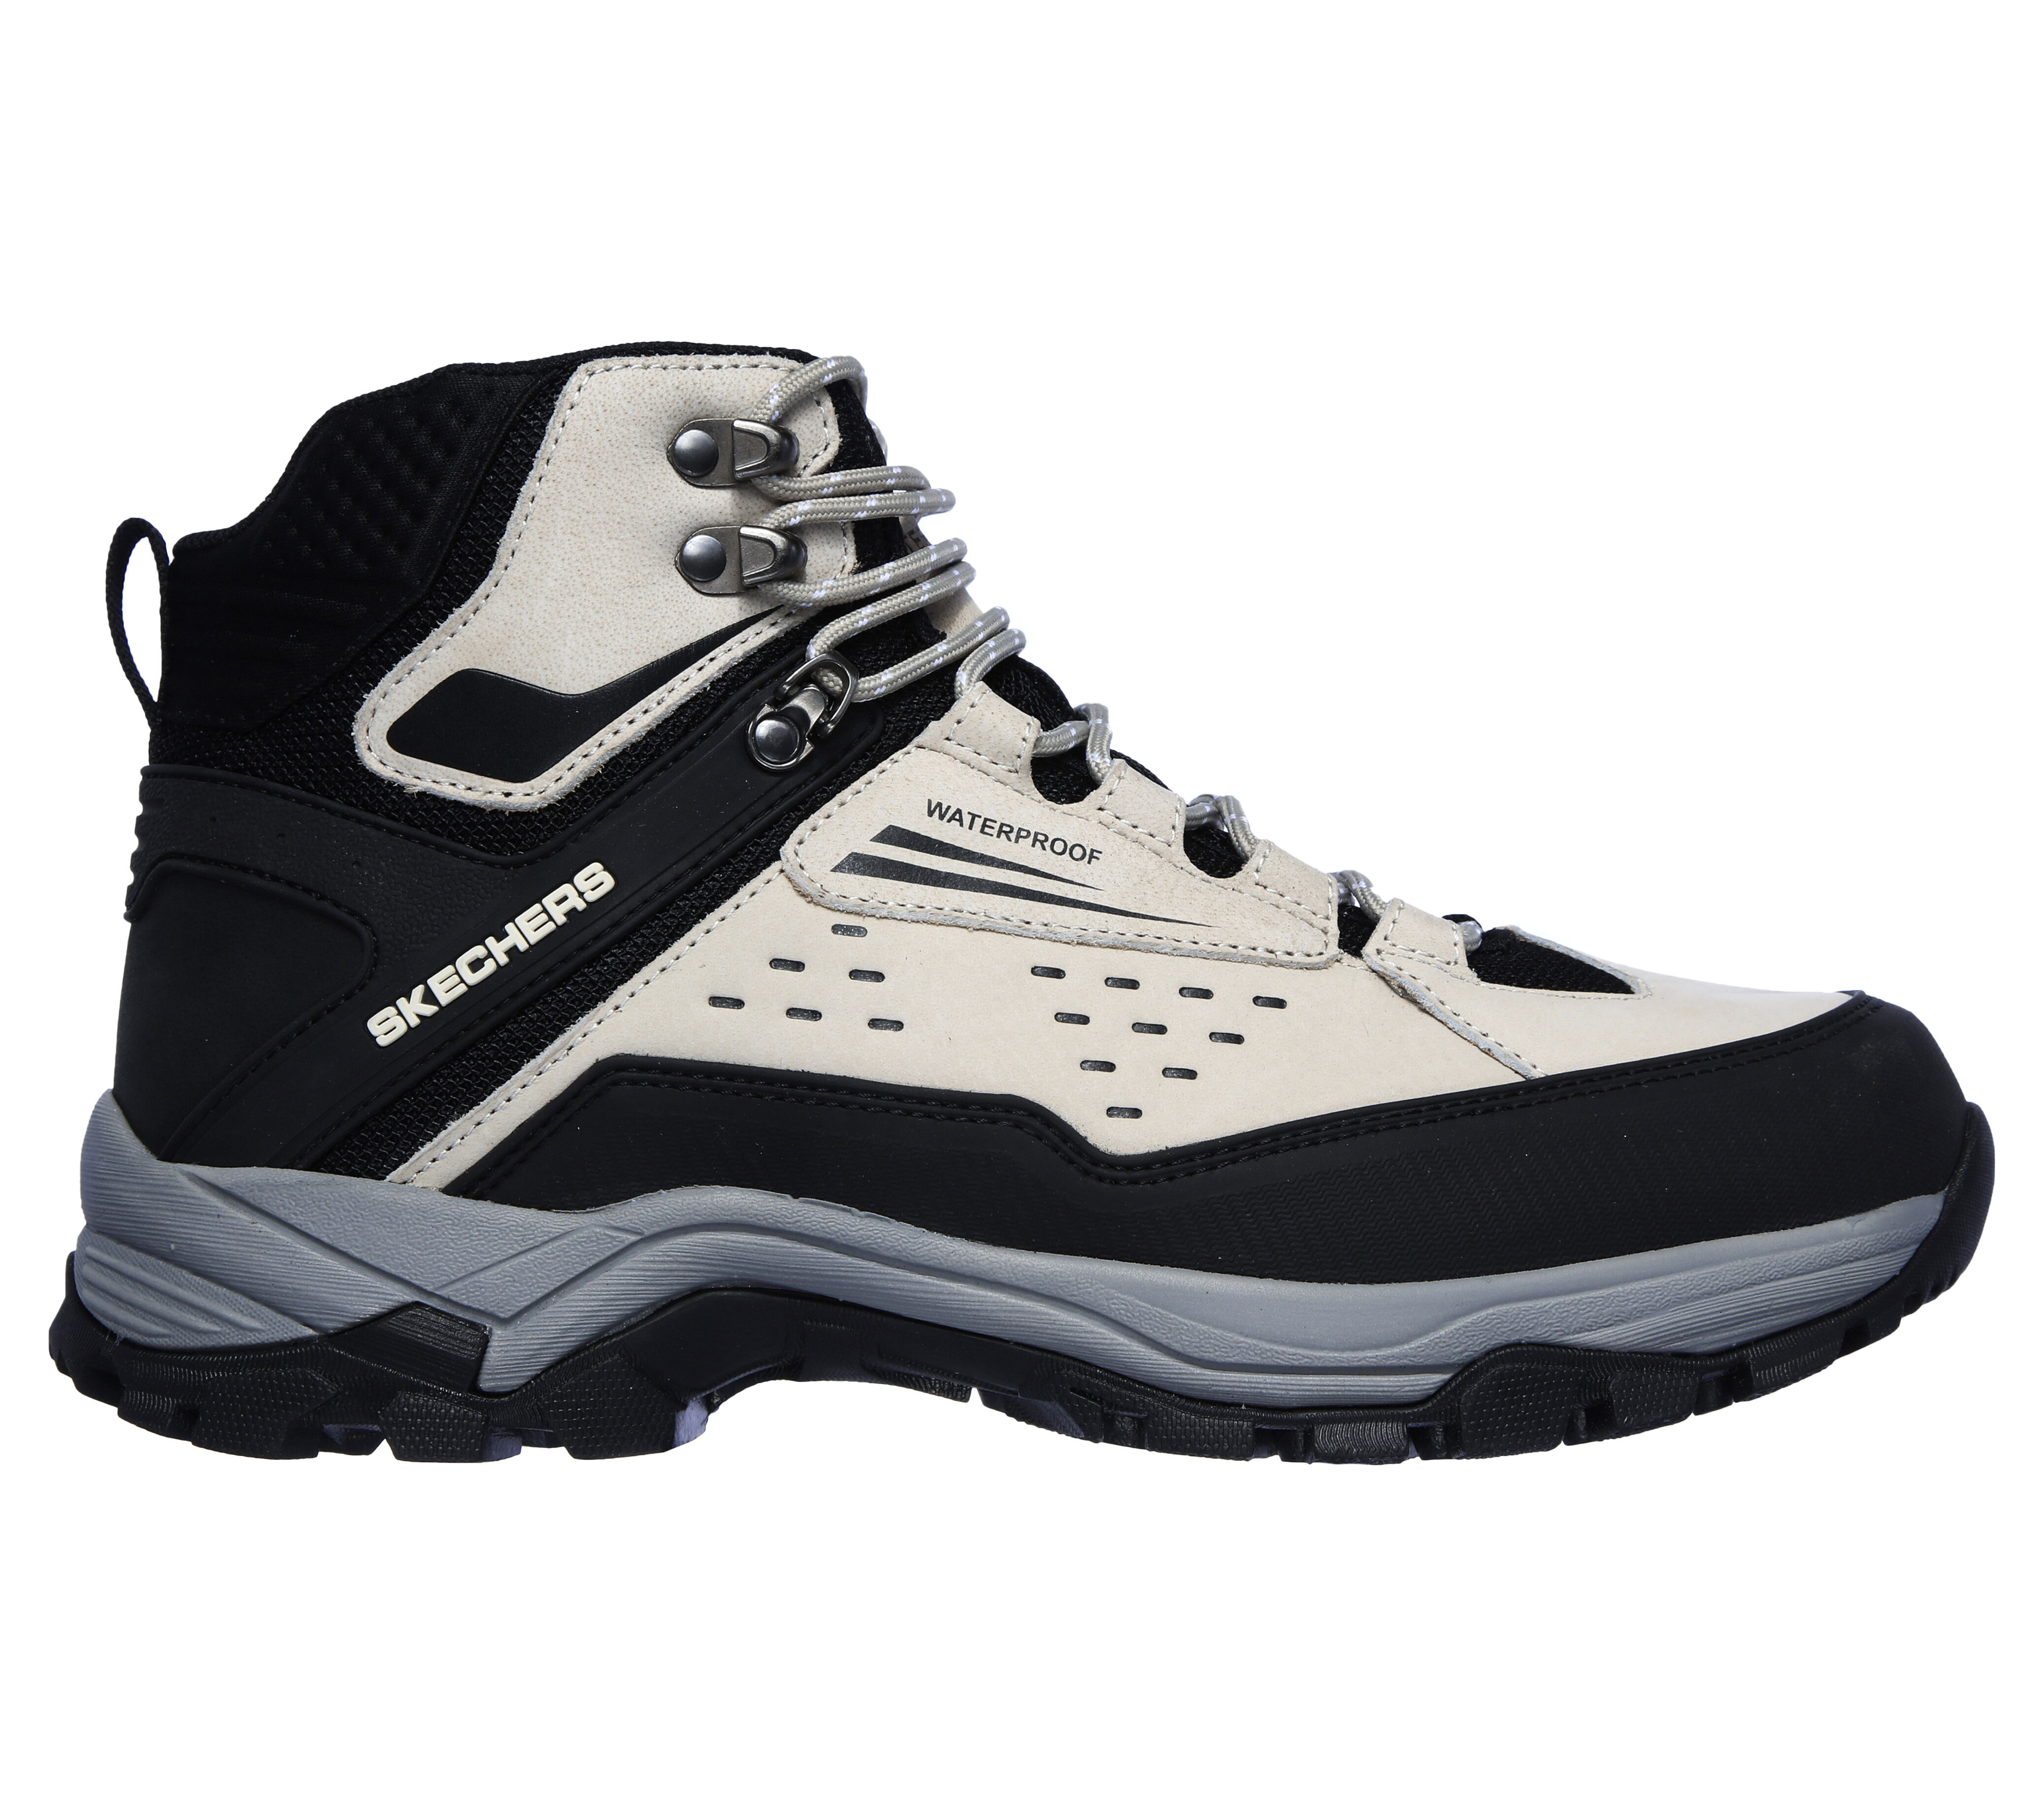 skechers wide fit boots